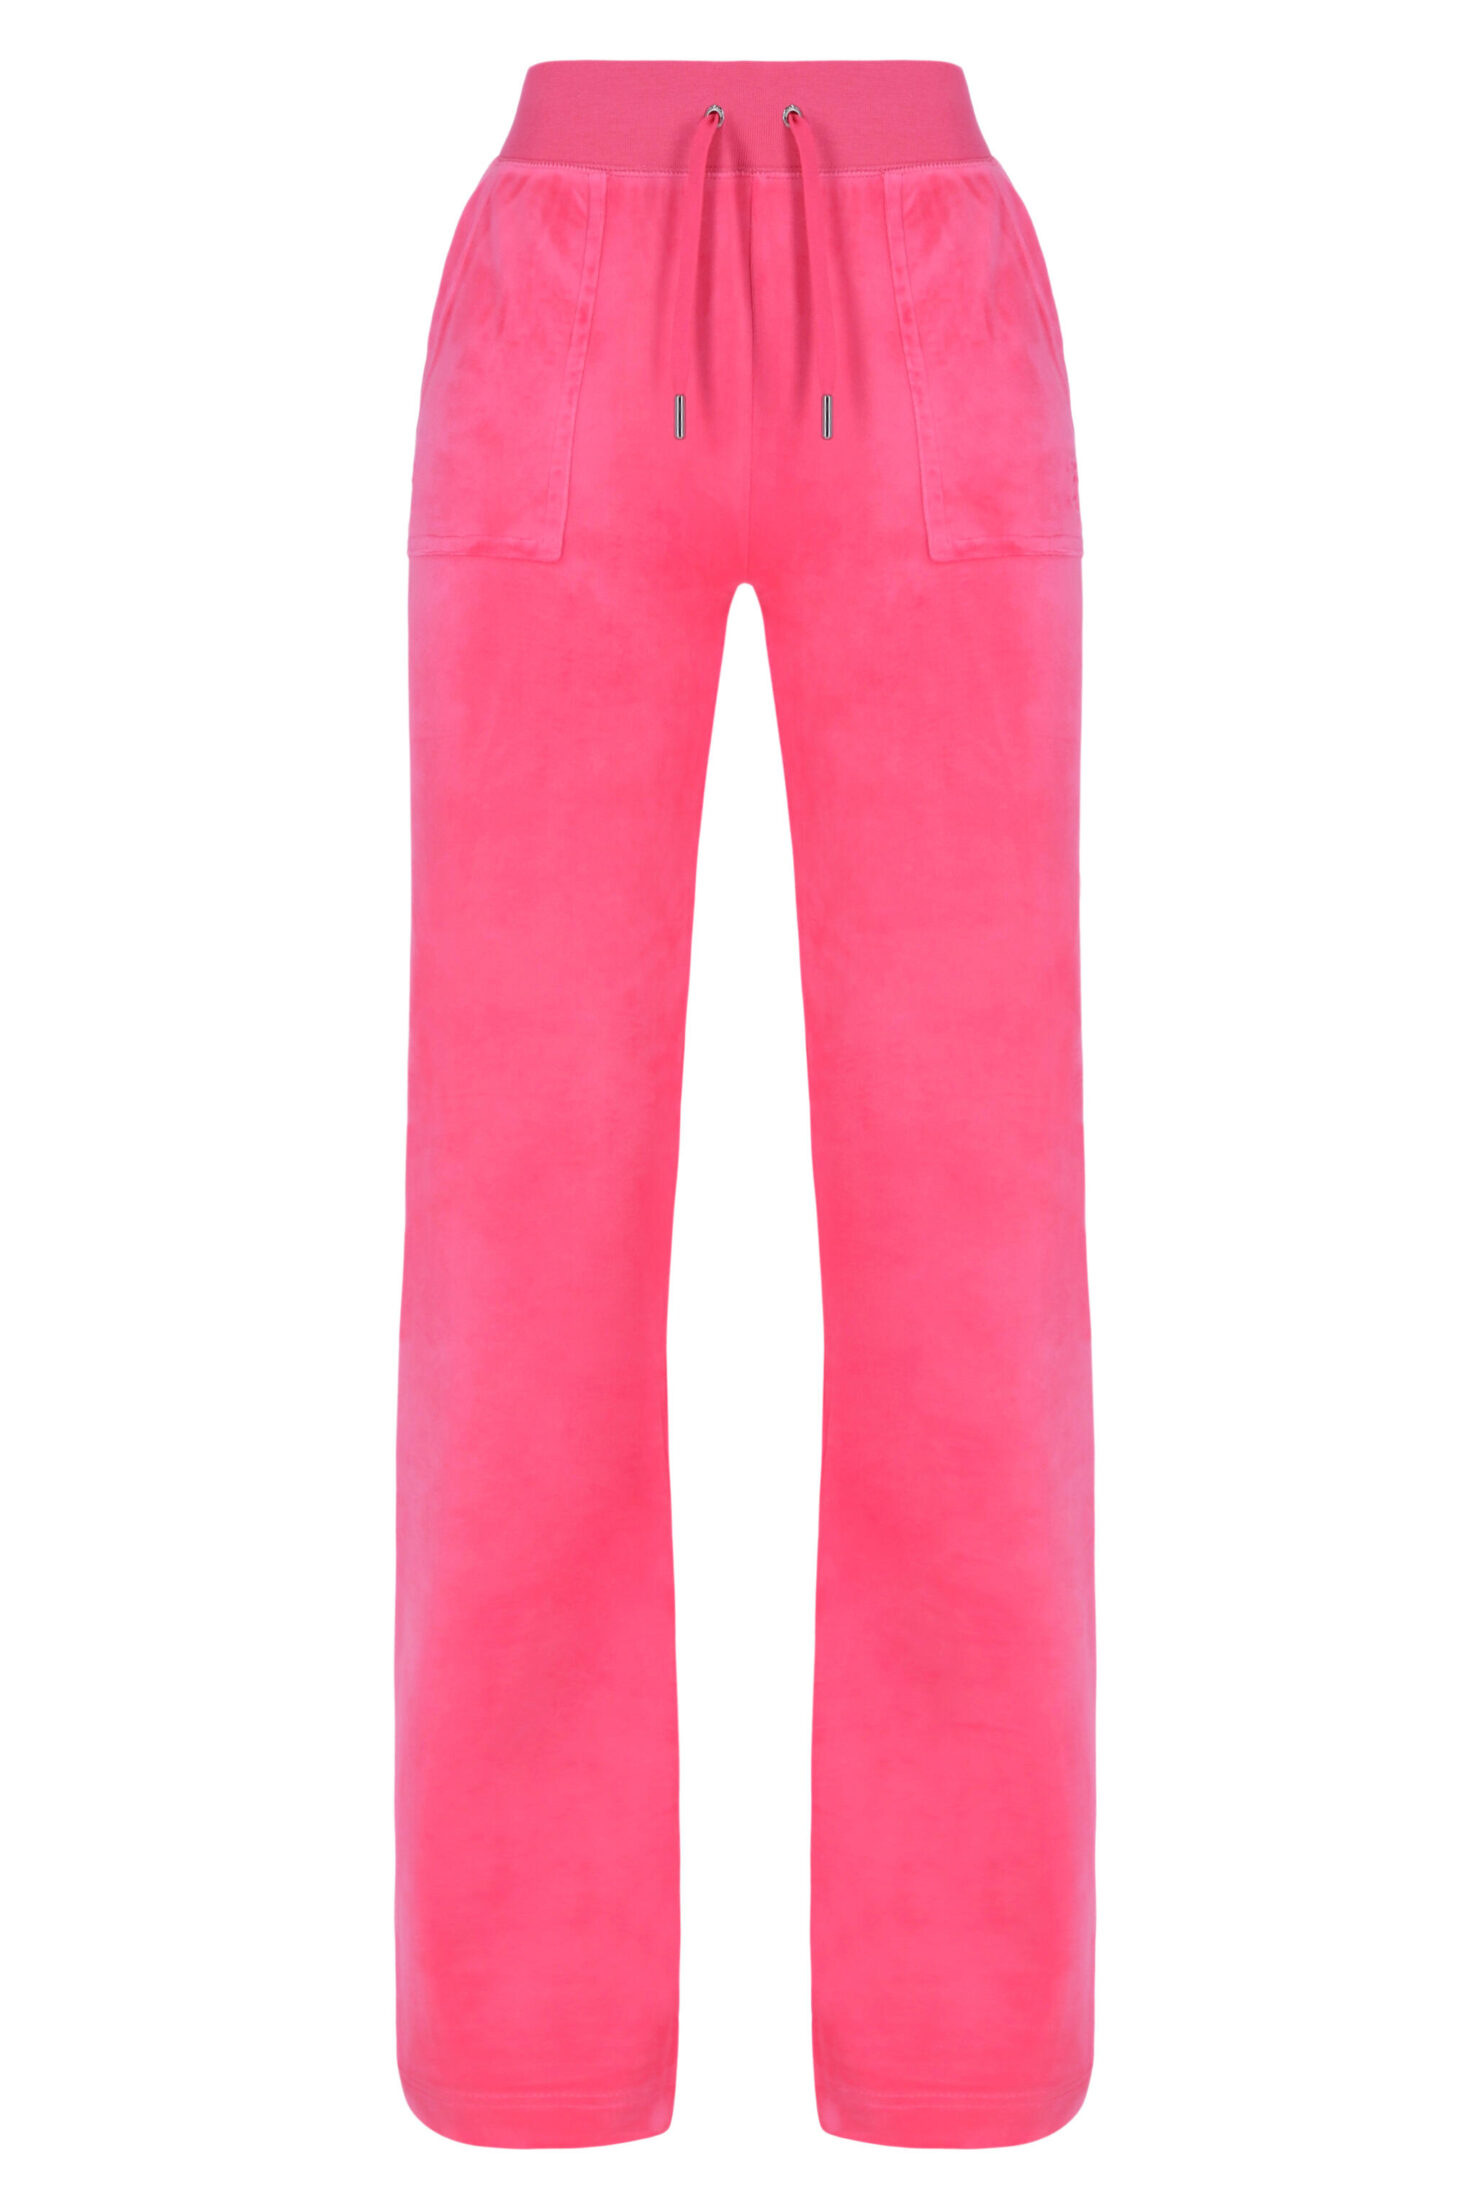 del20ray20pant20track20pant20with20pocket-jcap180-125-fluro20pink_01